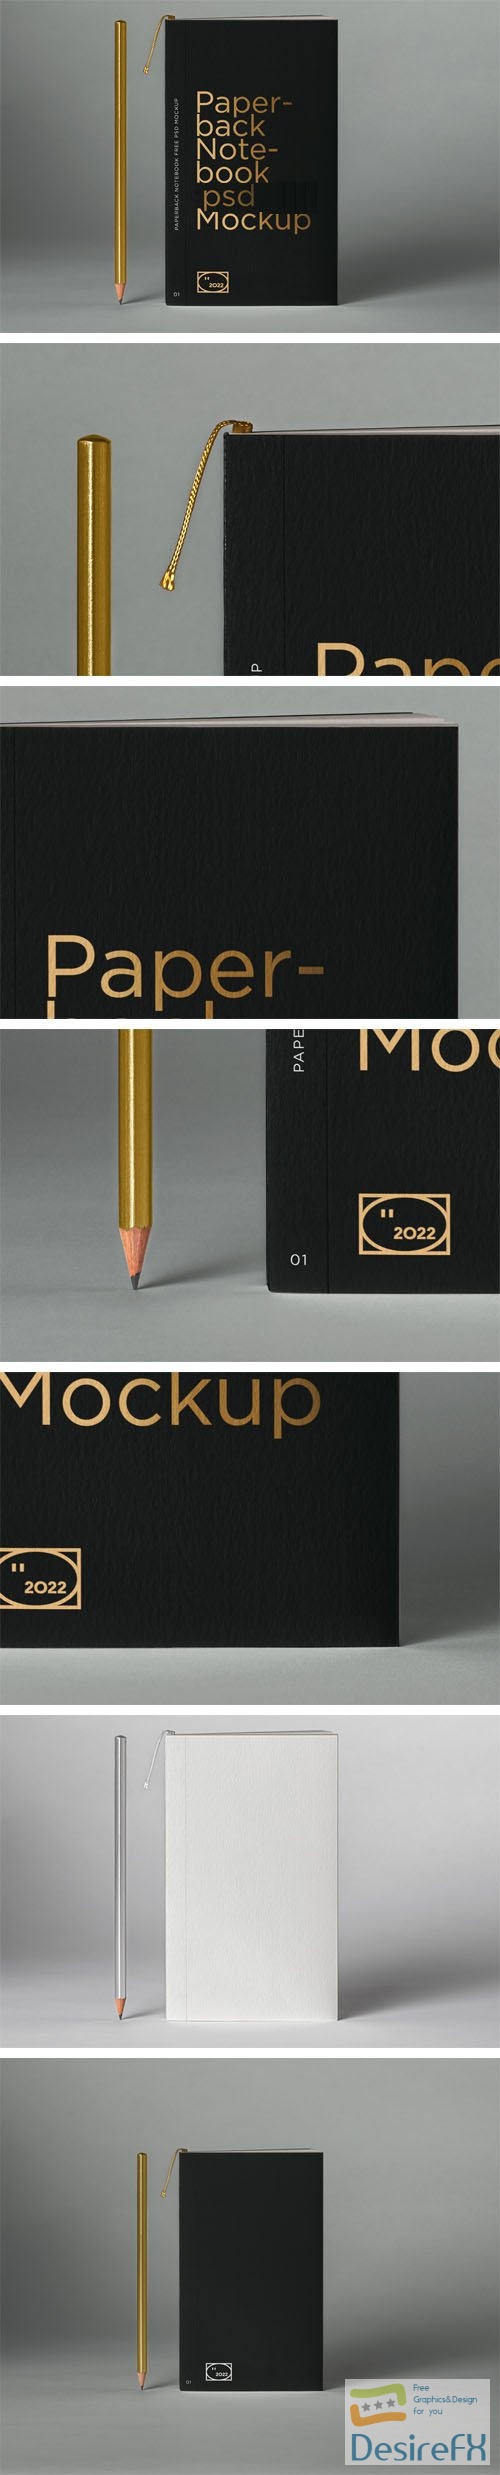 Notebook With Pencil - PSD Mockup Template